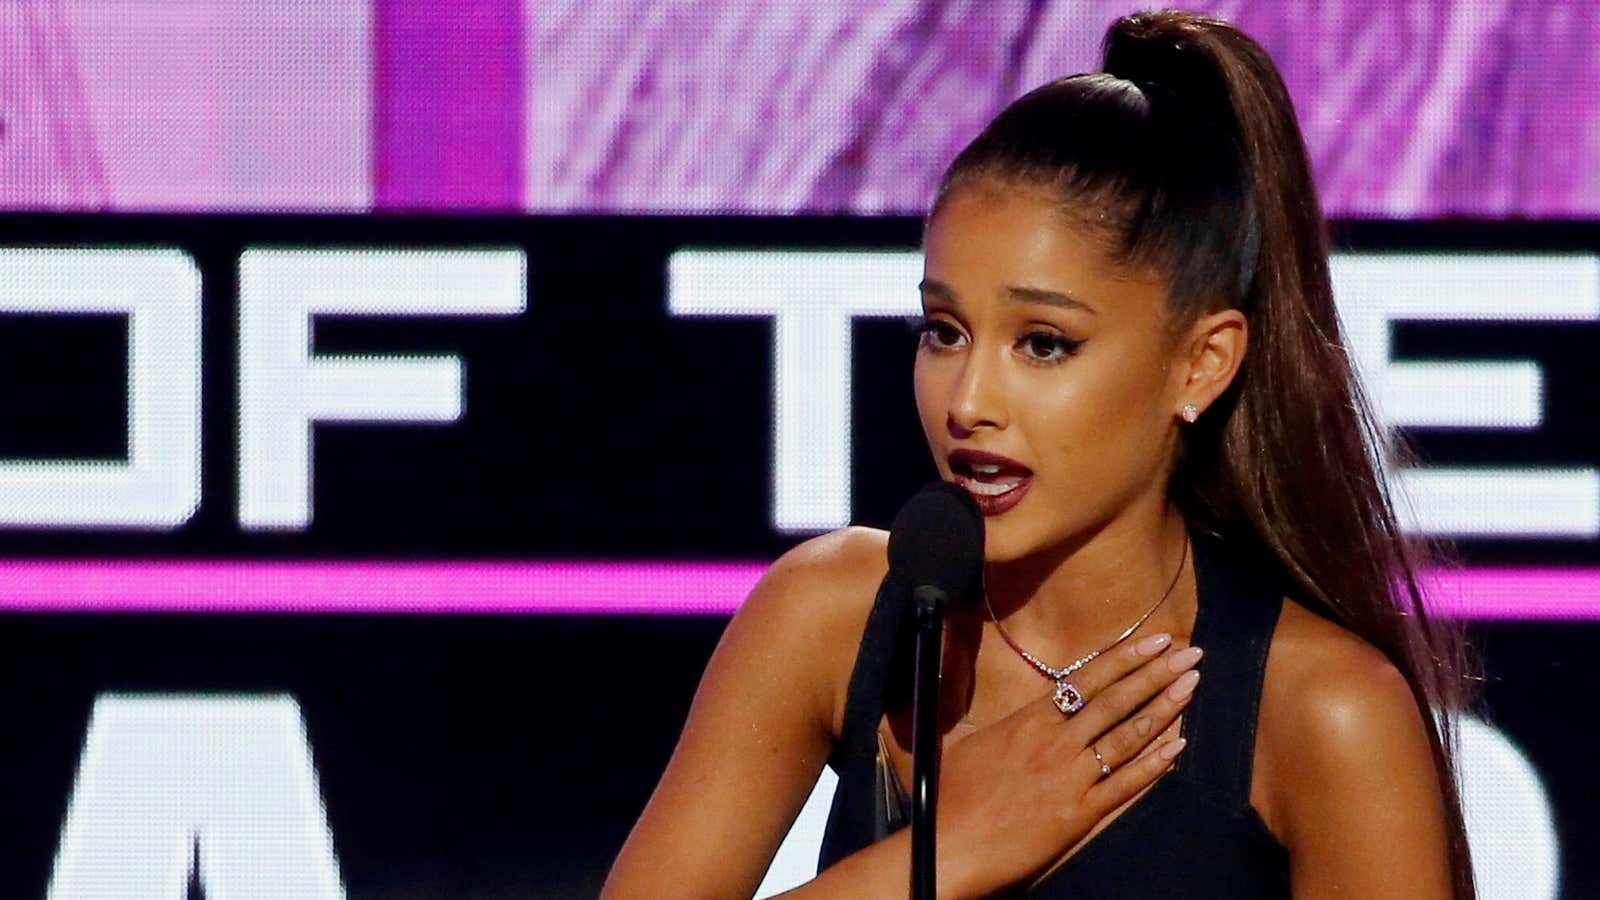 Ariana Grande is not quite who you think she is.